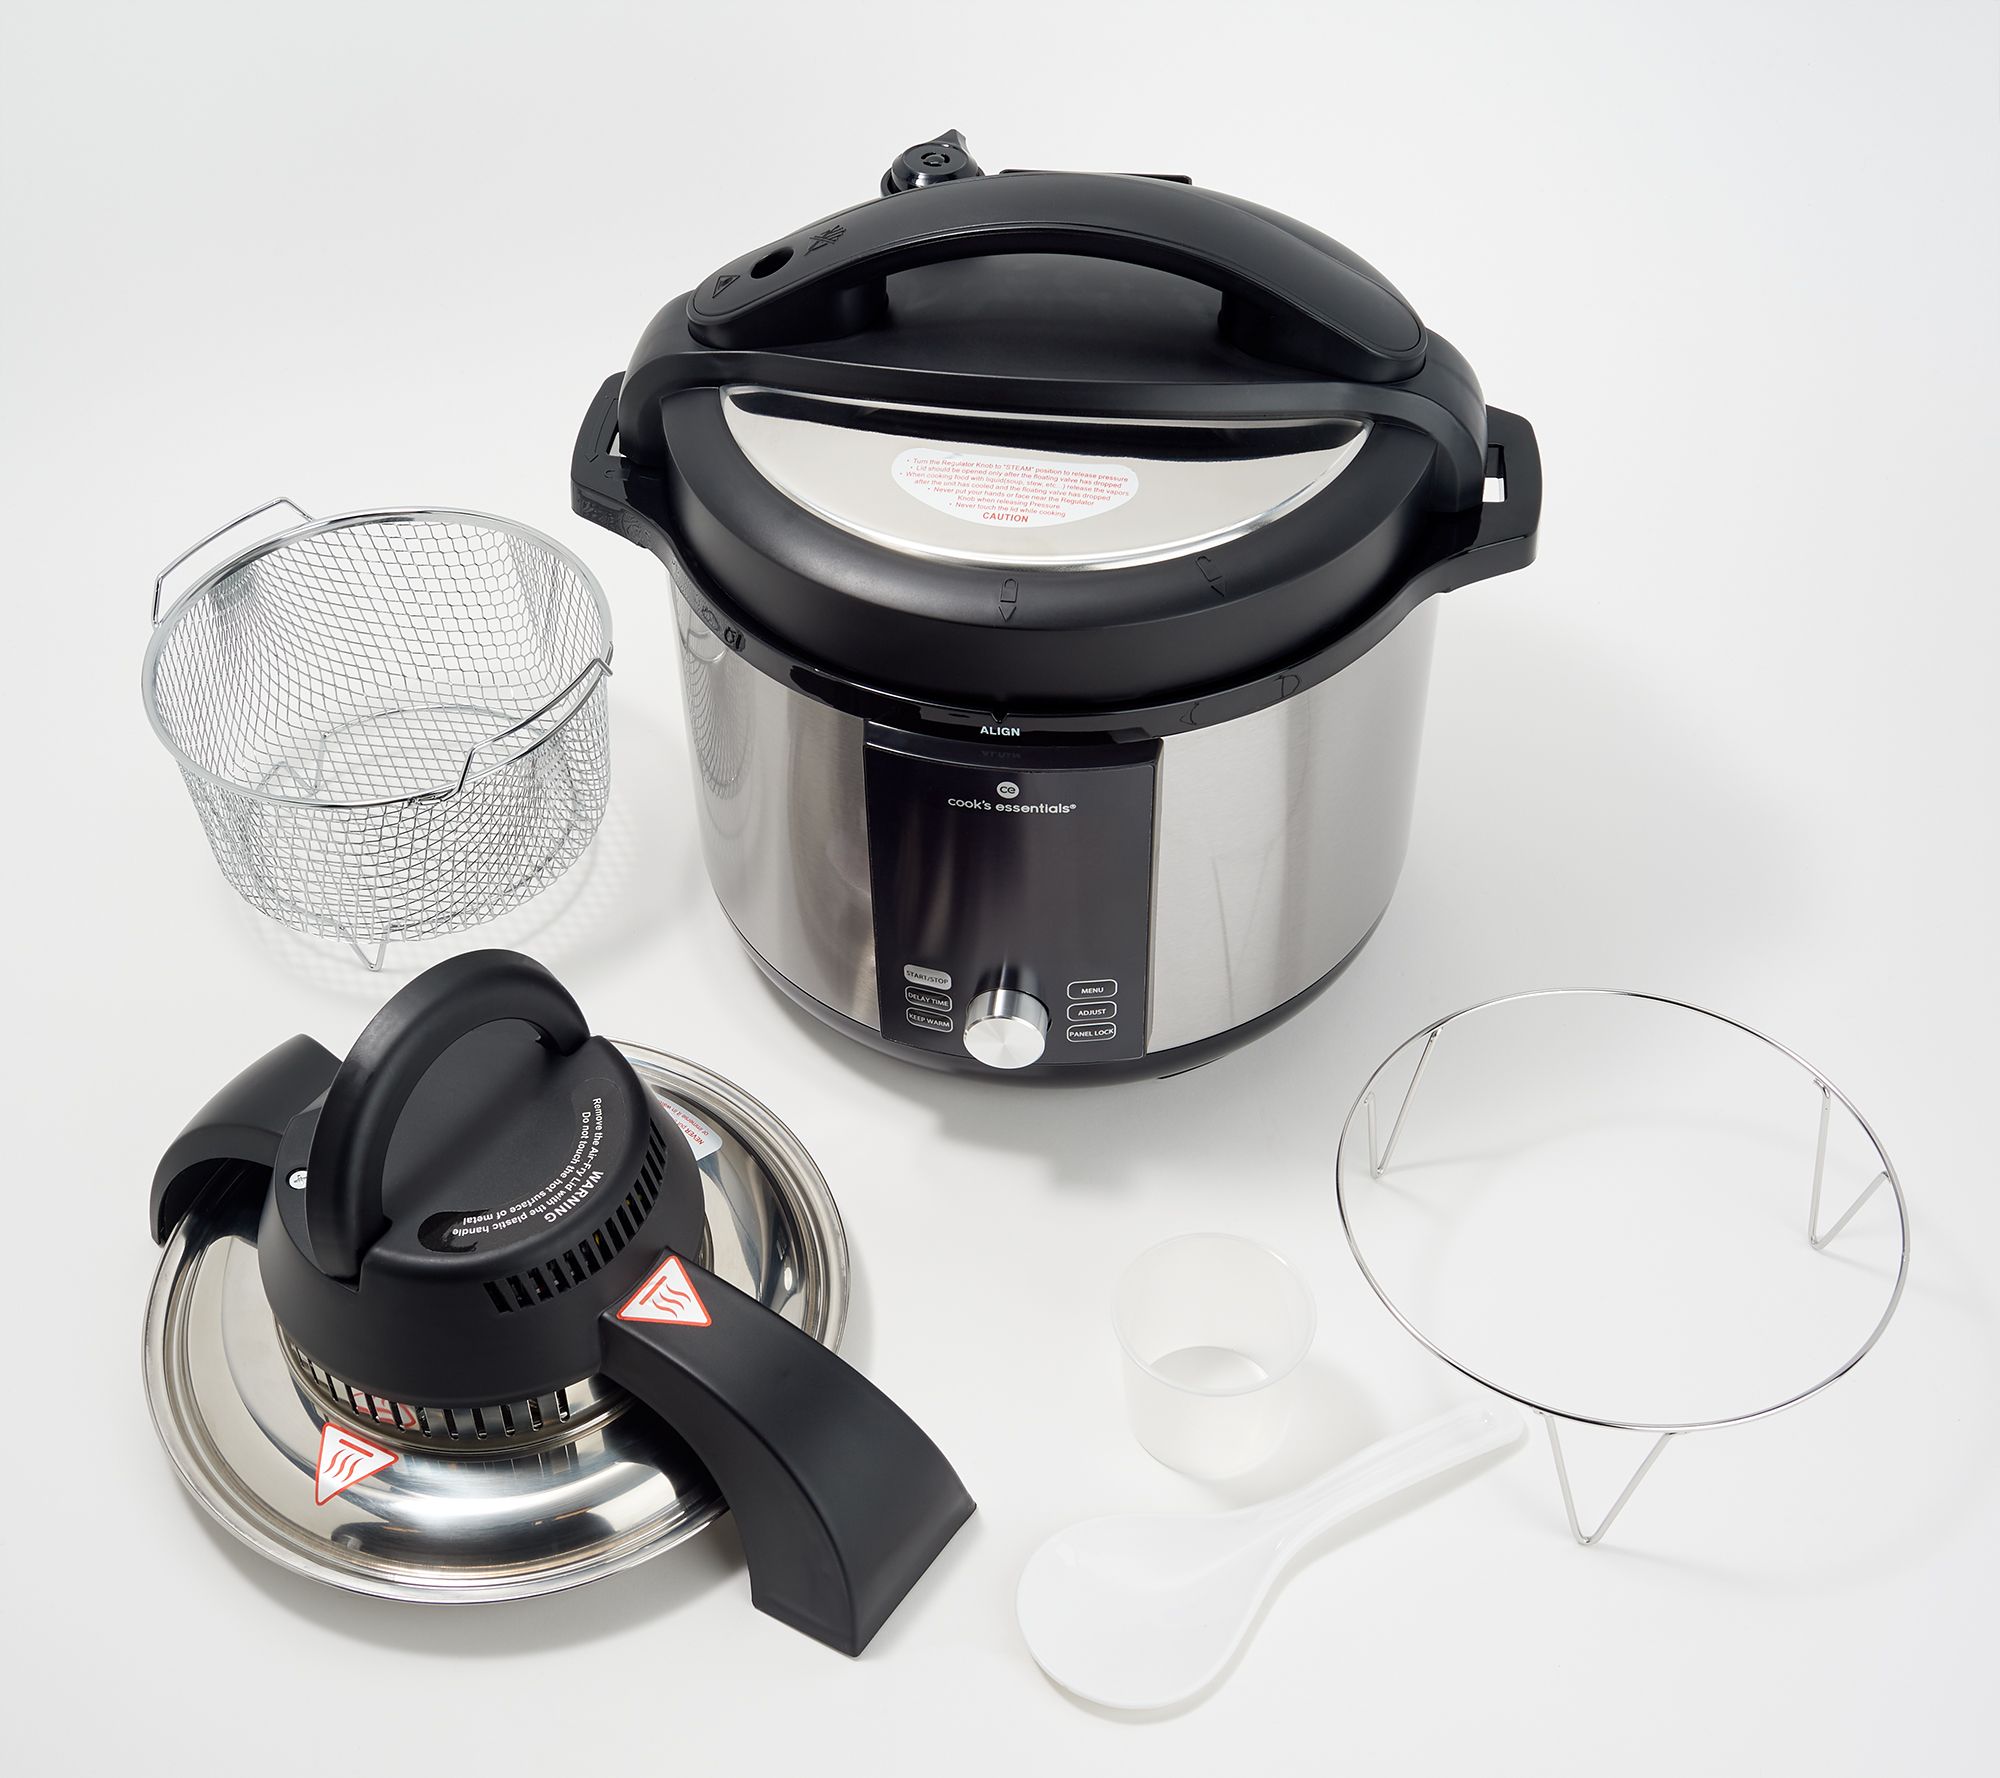 Cook's Essentials 6-qt 8-in-1 Pressure Cooker and Air Fryer